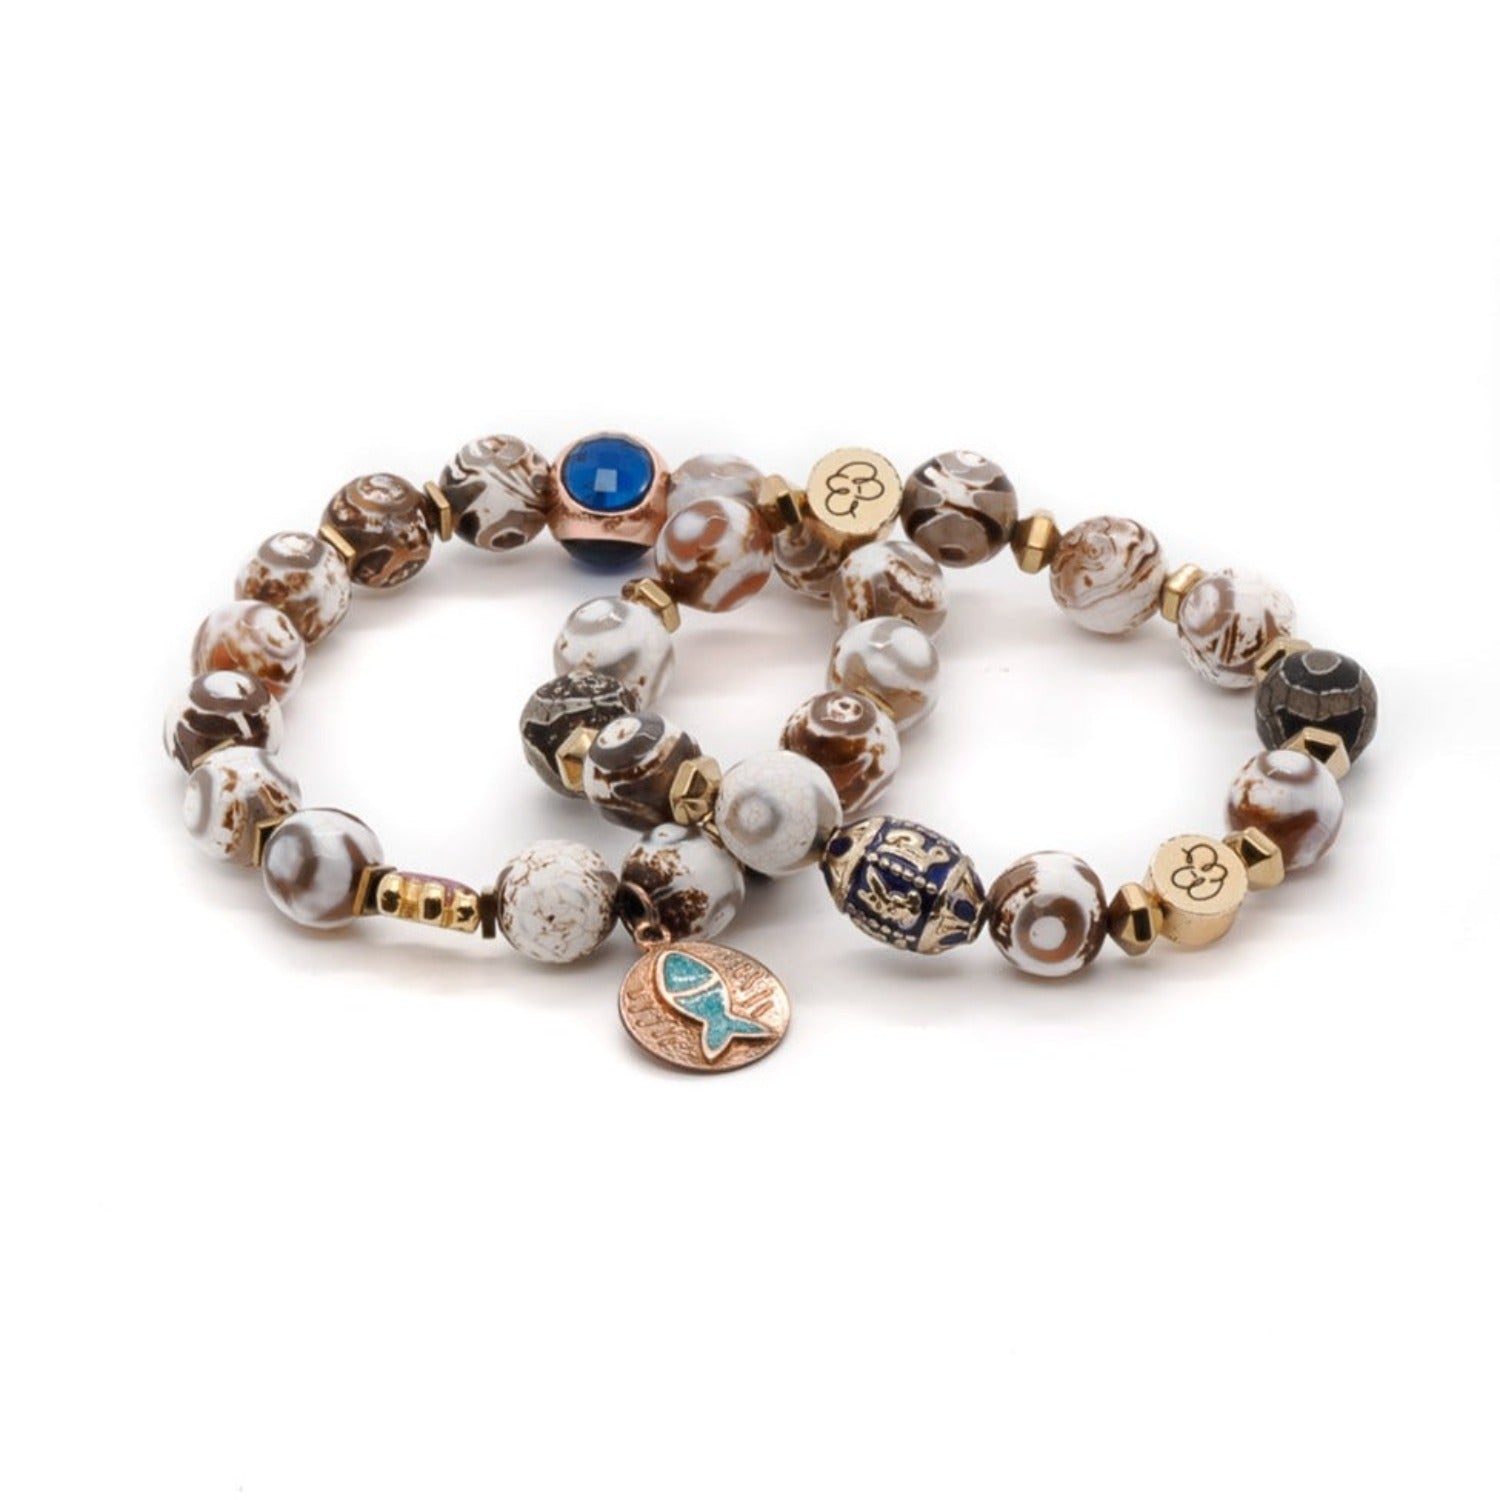 Embrace the empowering energy of the Lucky Fish Bracelet Set, featuring Tibetan agate beads, gold hematite, blue and gold glass beads, and symbolic charms for good luck and prosperity.